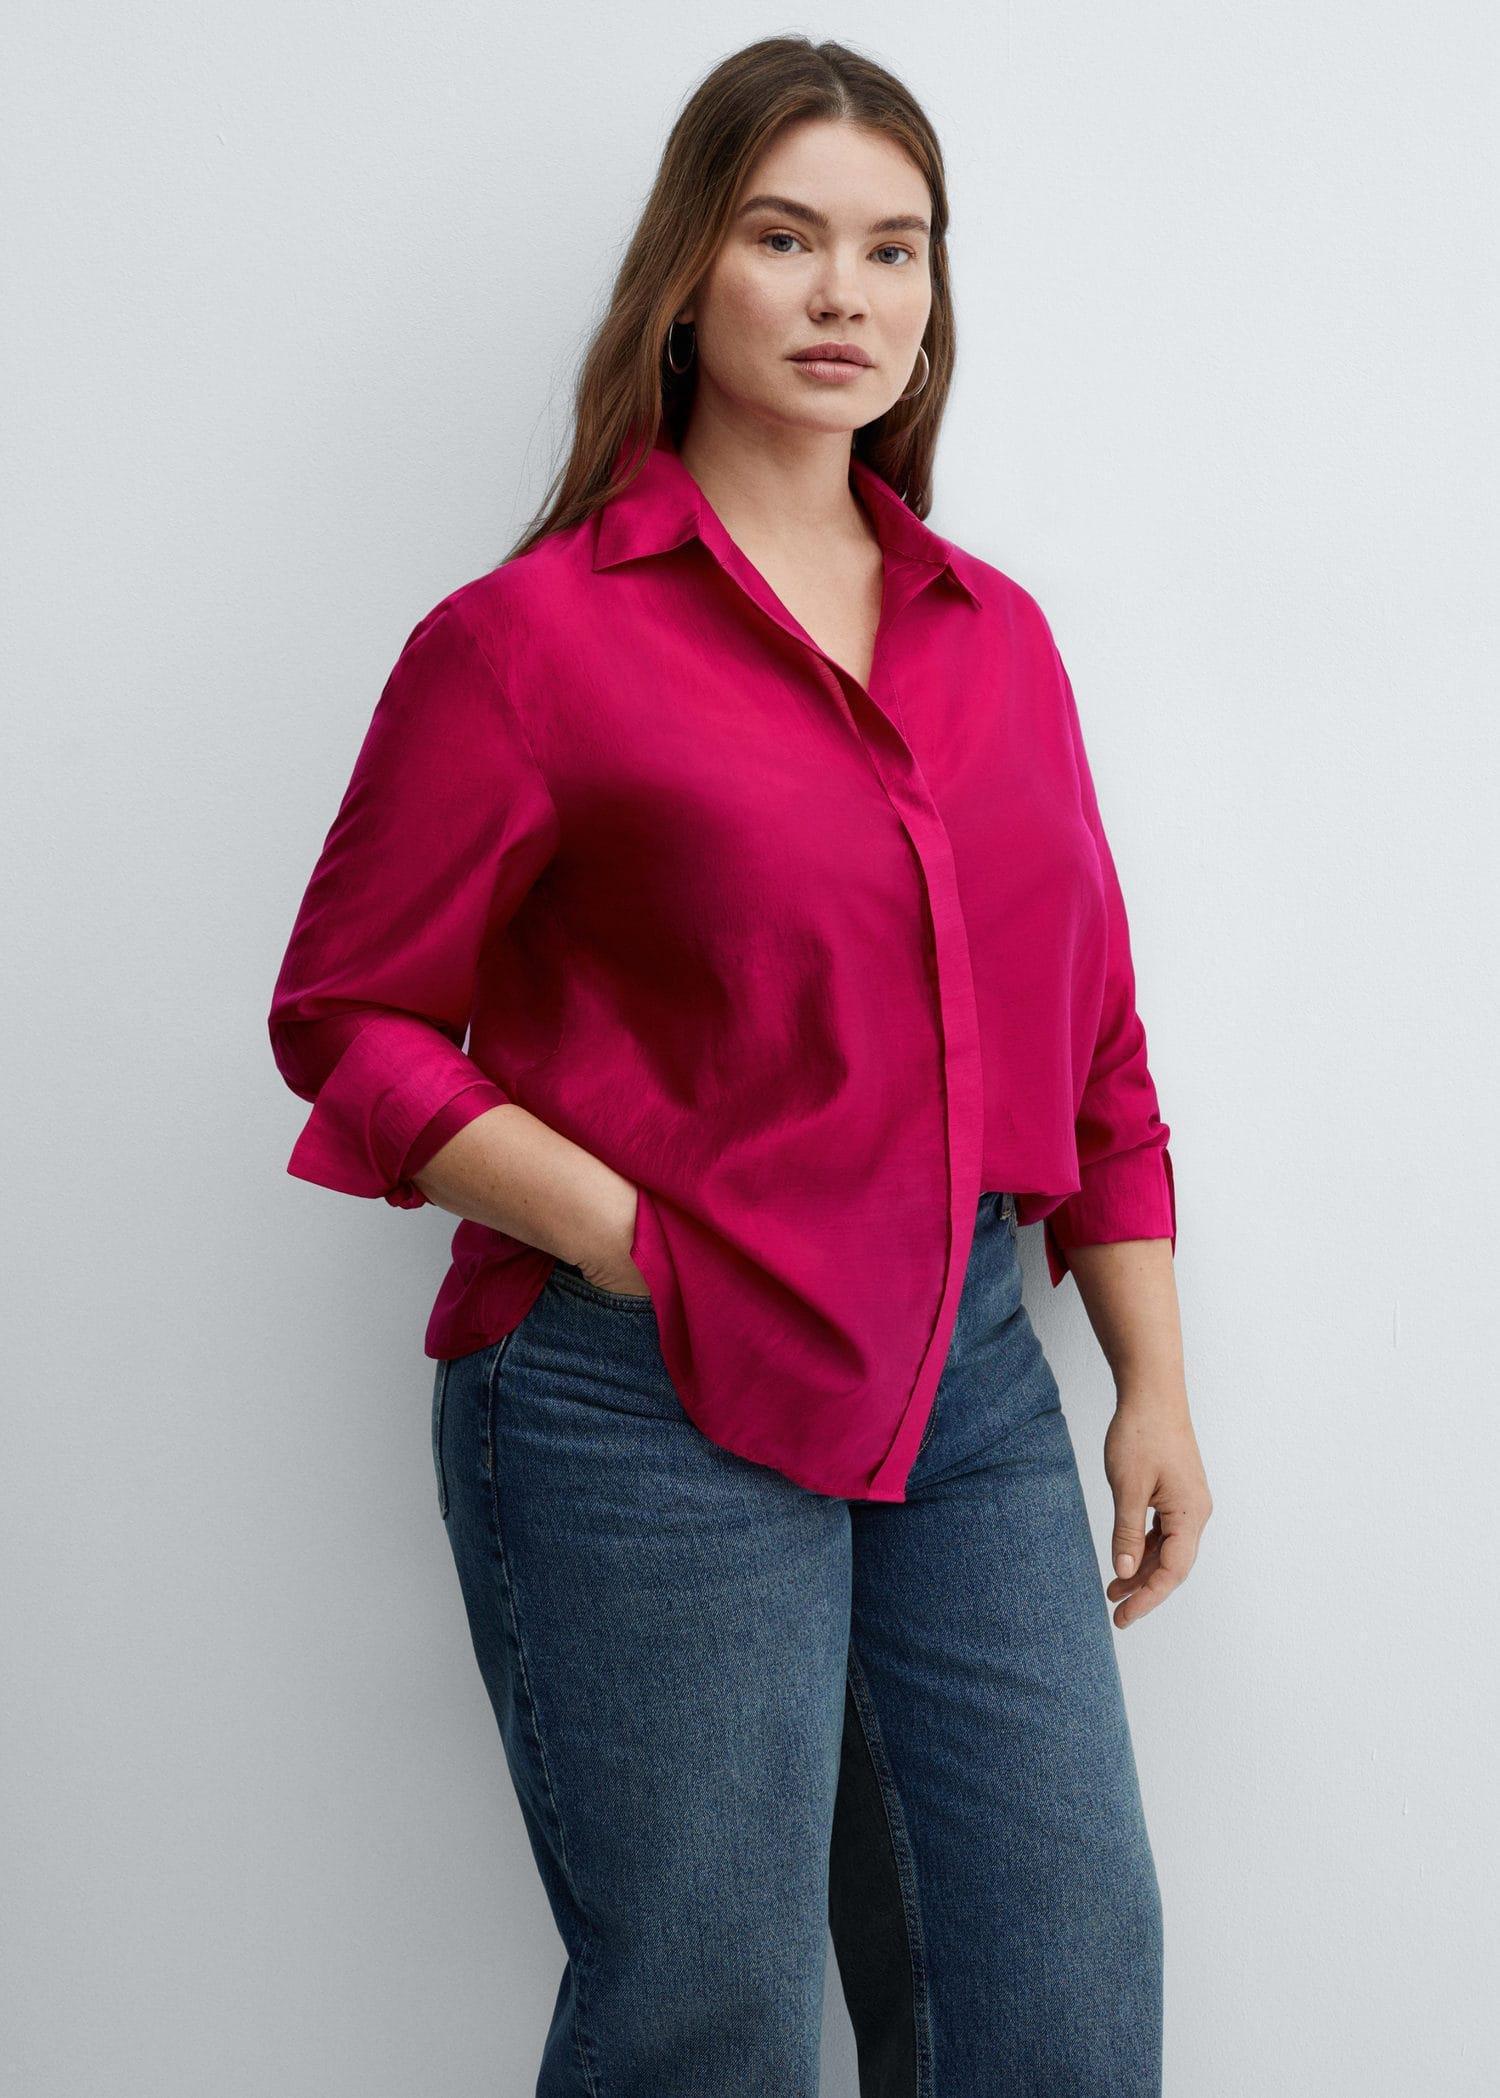 Mango - Red Concealed Button Shirt